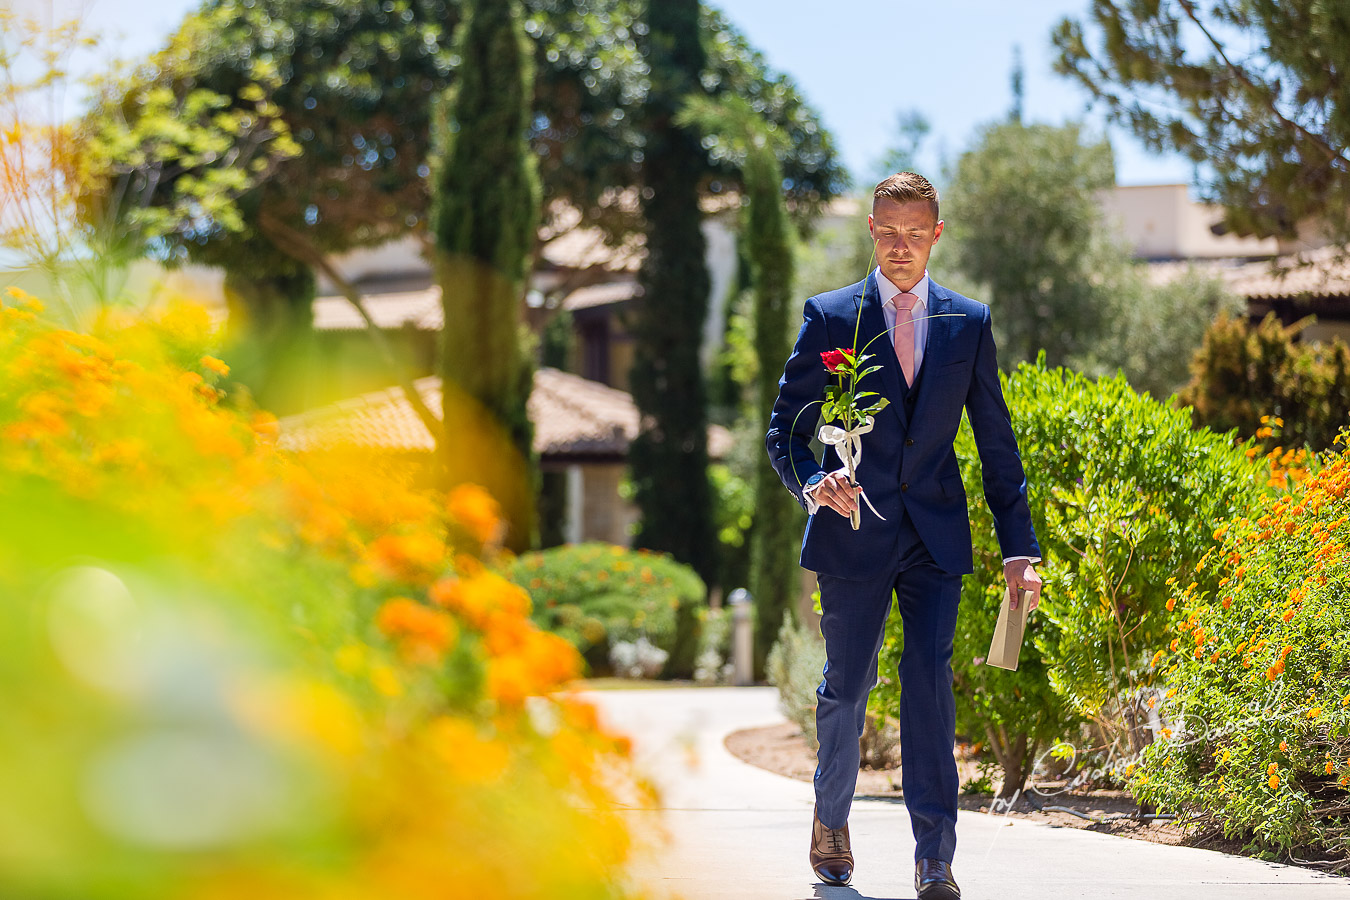 The Bestman delivering a flower and an envelop captured at Aphrodite Hills Resort before the wedding ceremony by Cristian Dascalu.